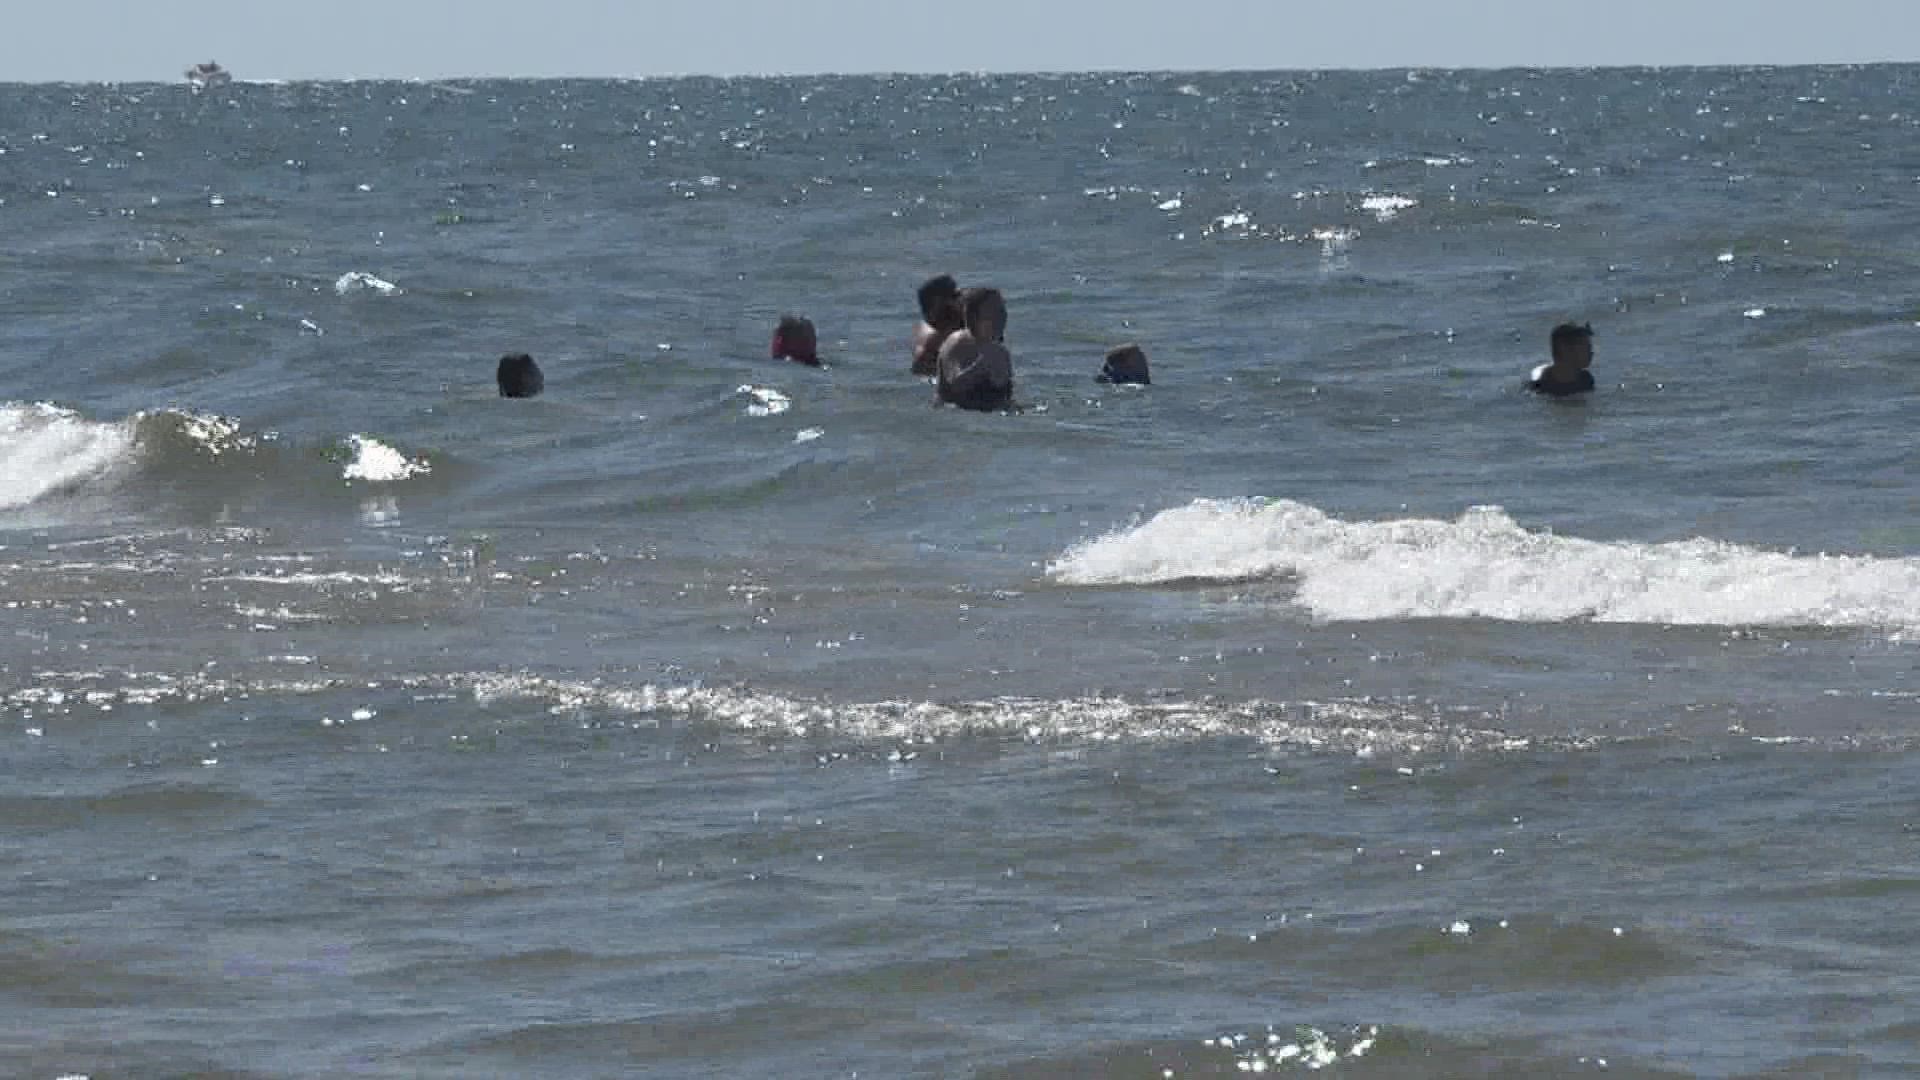 77 people have drowned in the Great Lakes this year. 35 of those were on Lake Michigan.